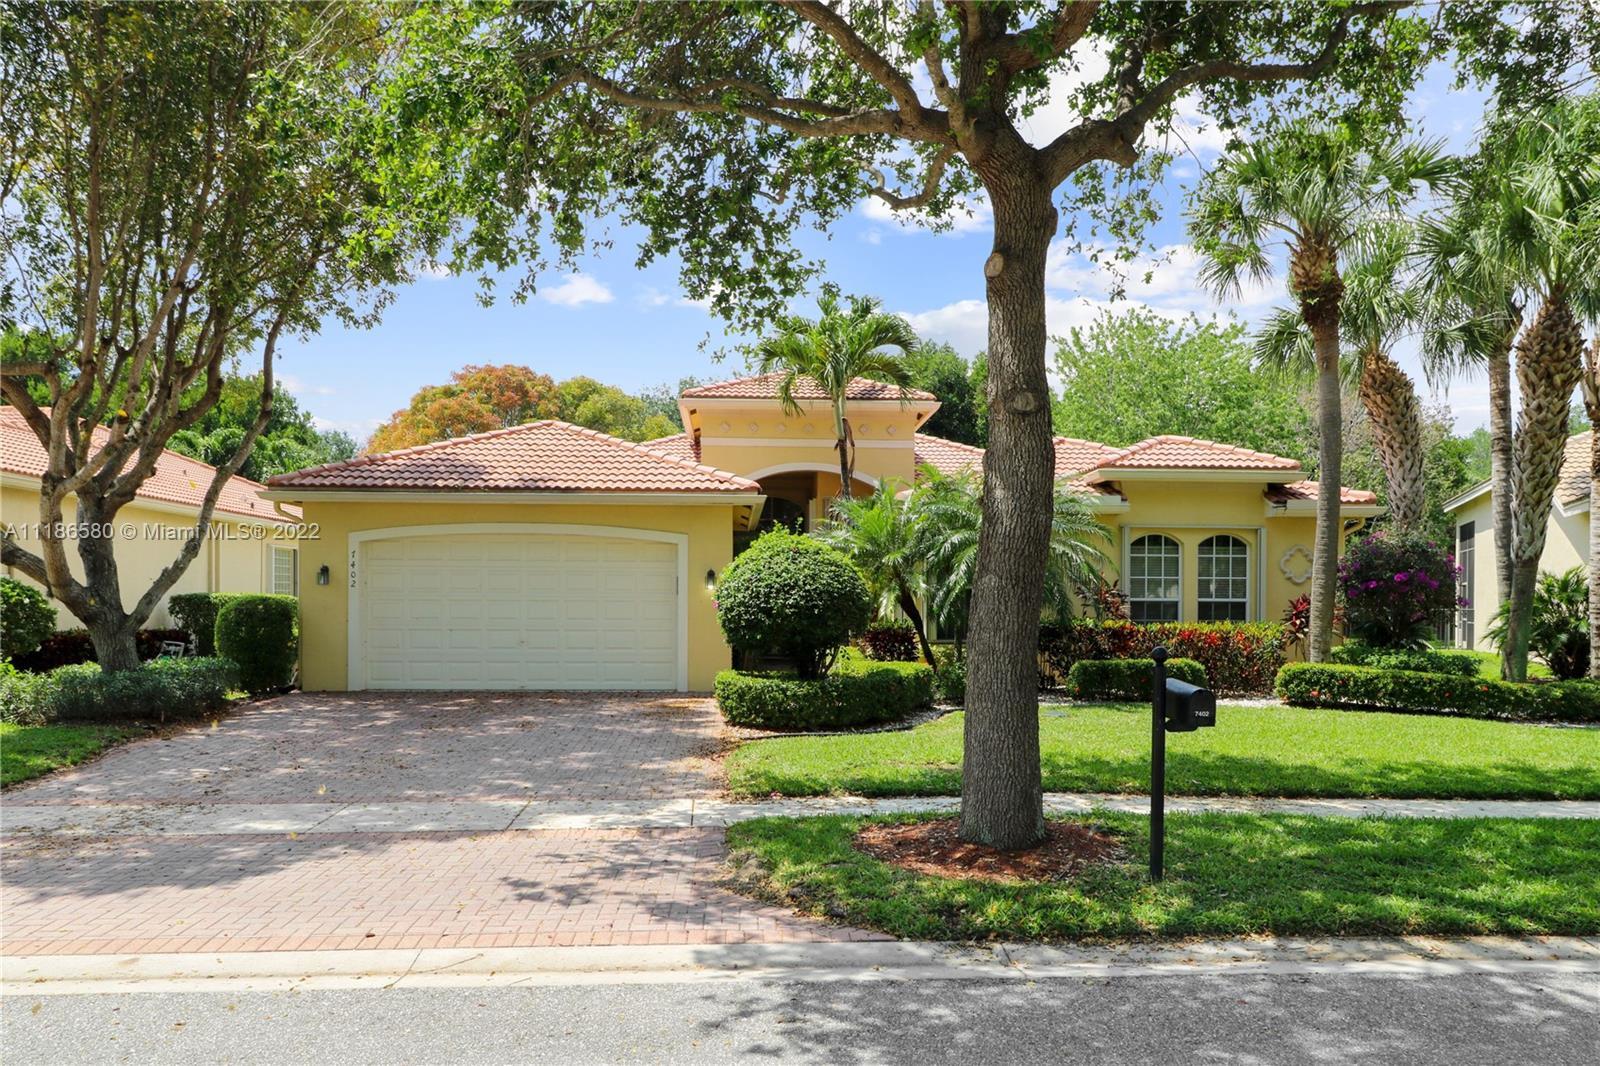 Welcome home to this beautifully maintained home located in the prestigious gated community of Valen